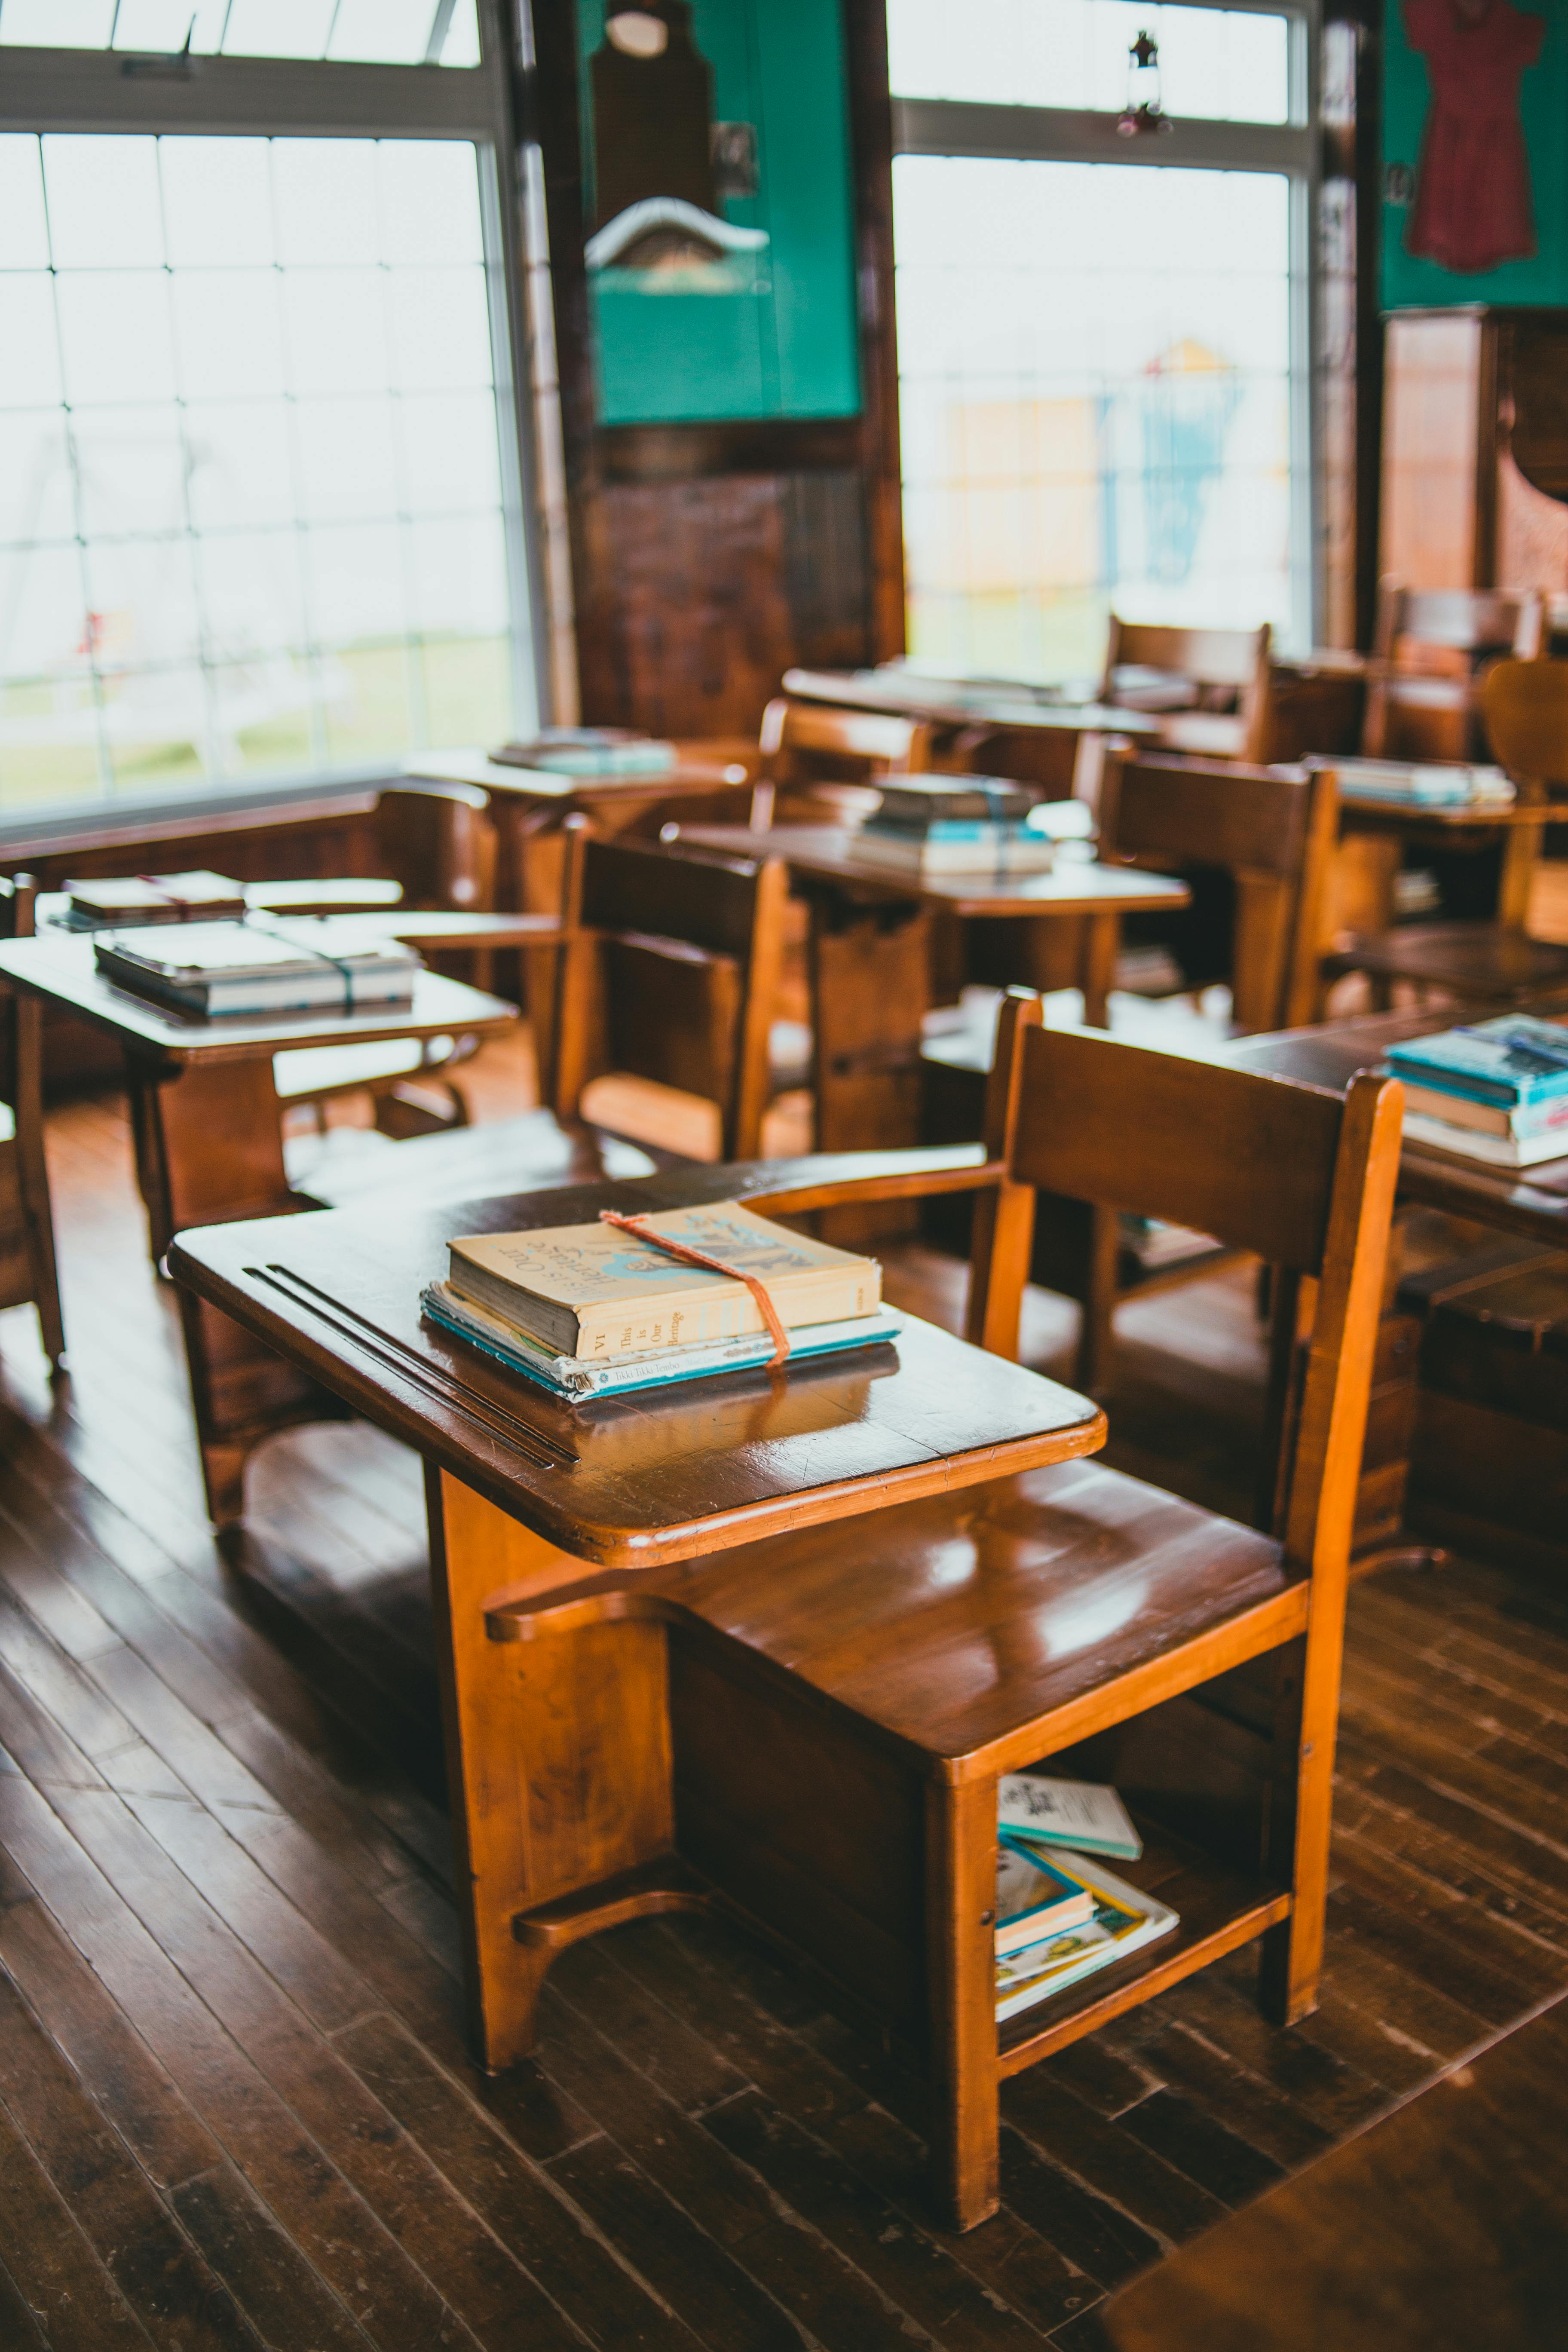 Chairs in a classroom | Source: Pexels